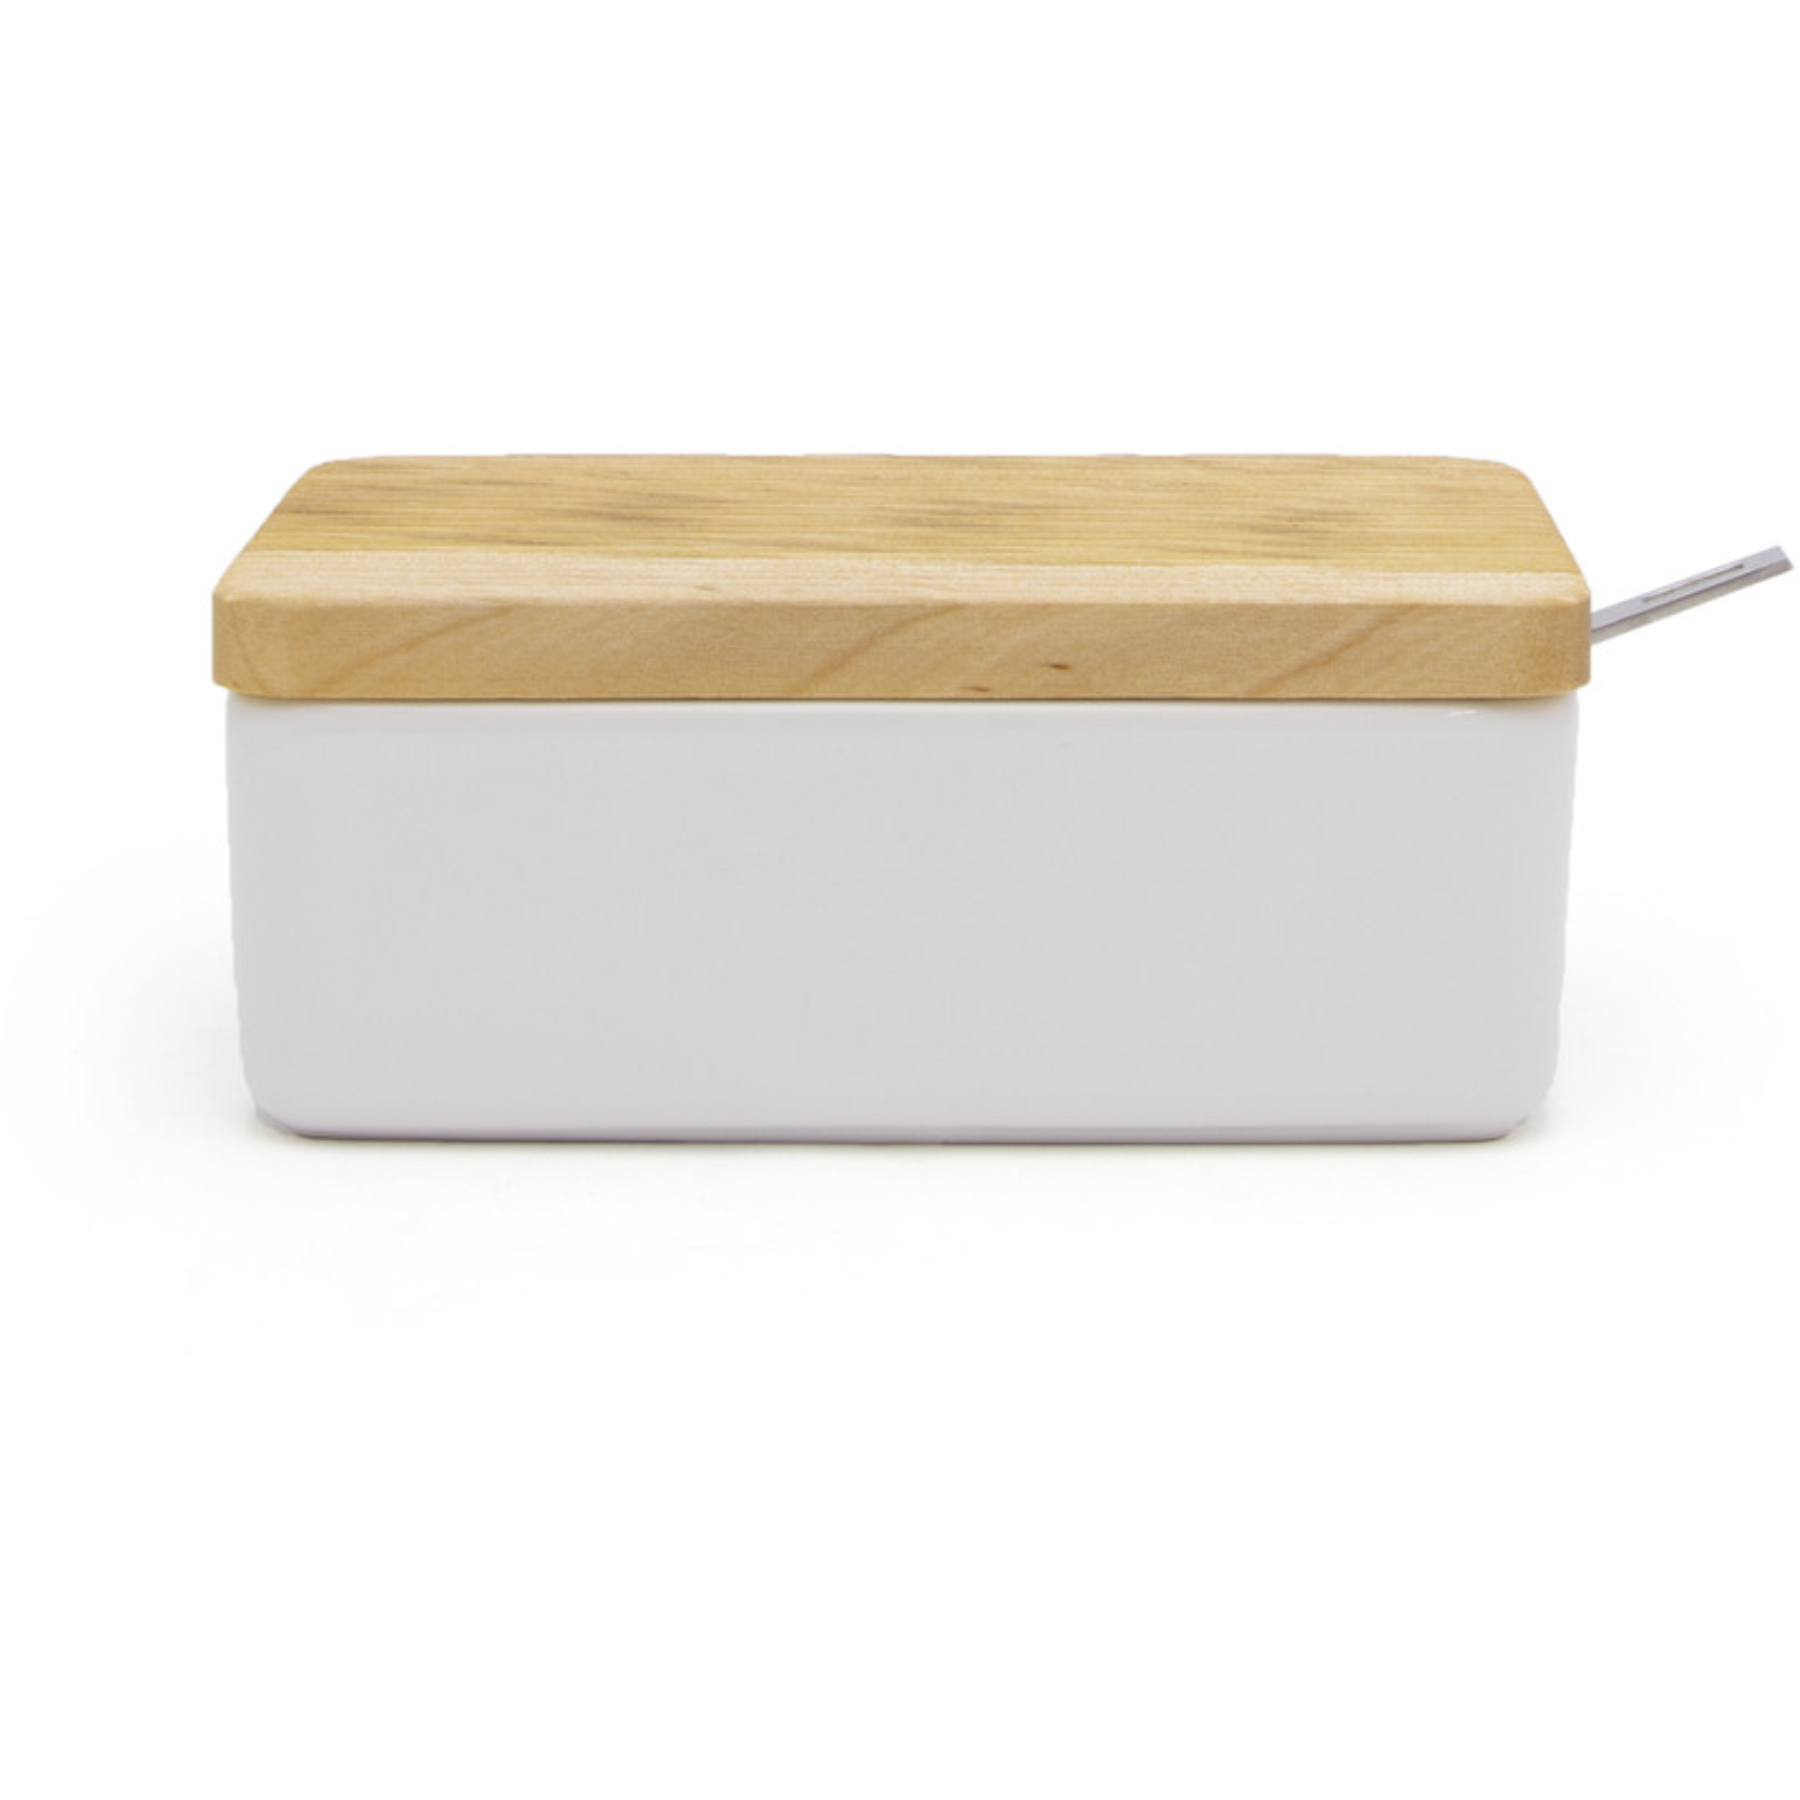 Zero Japan Butter Dish with Timber Lid - White